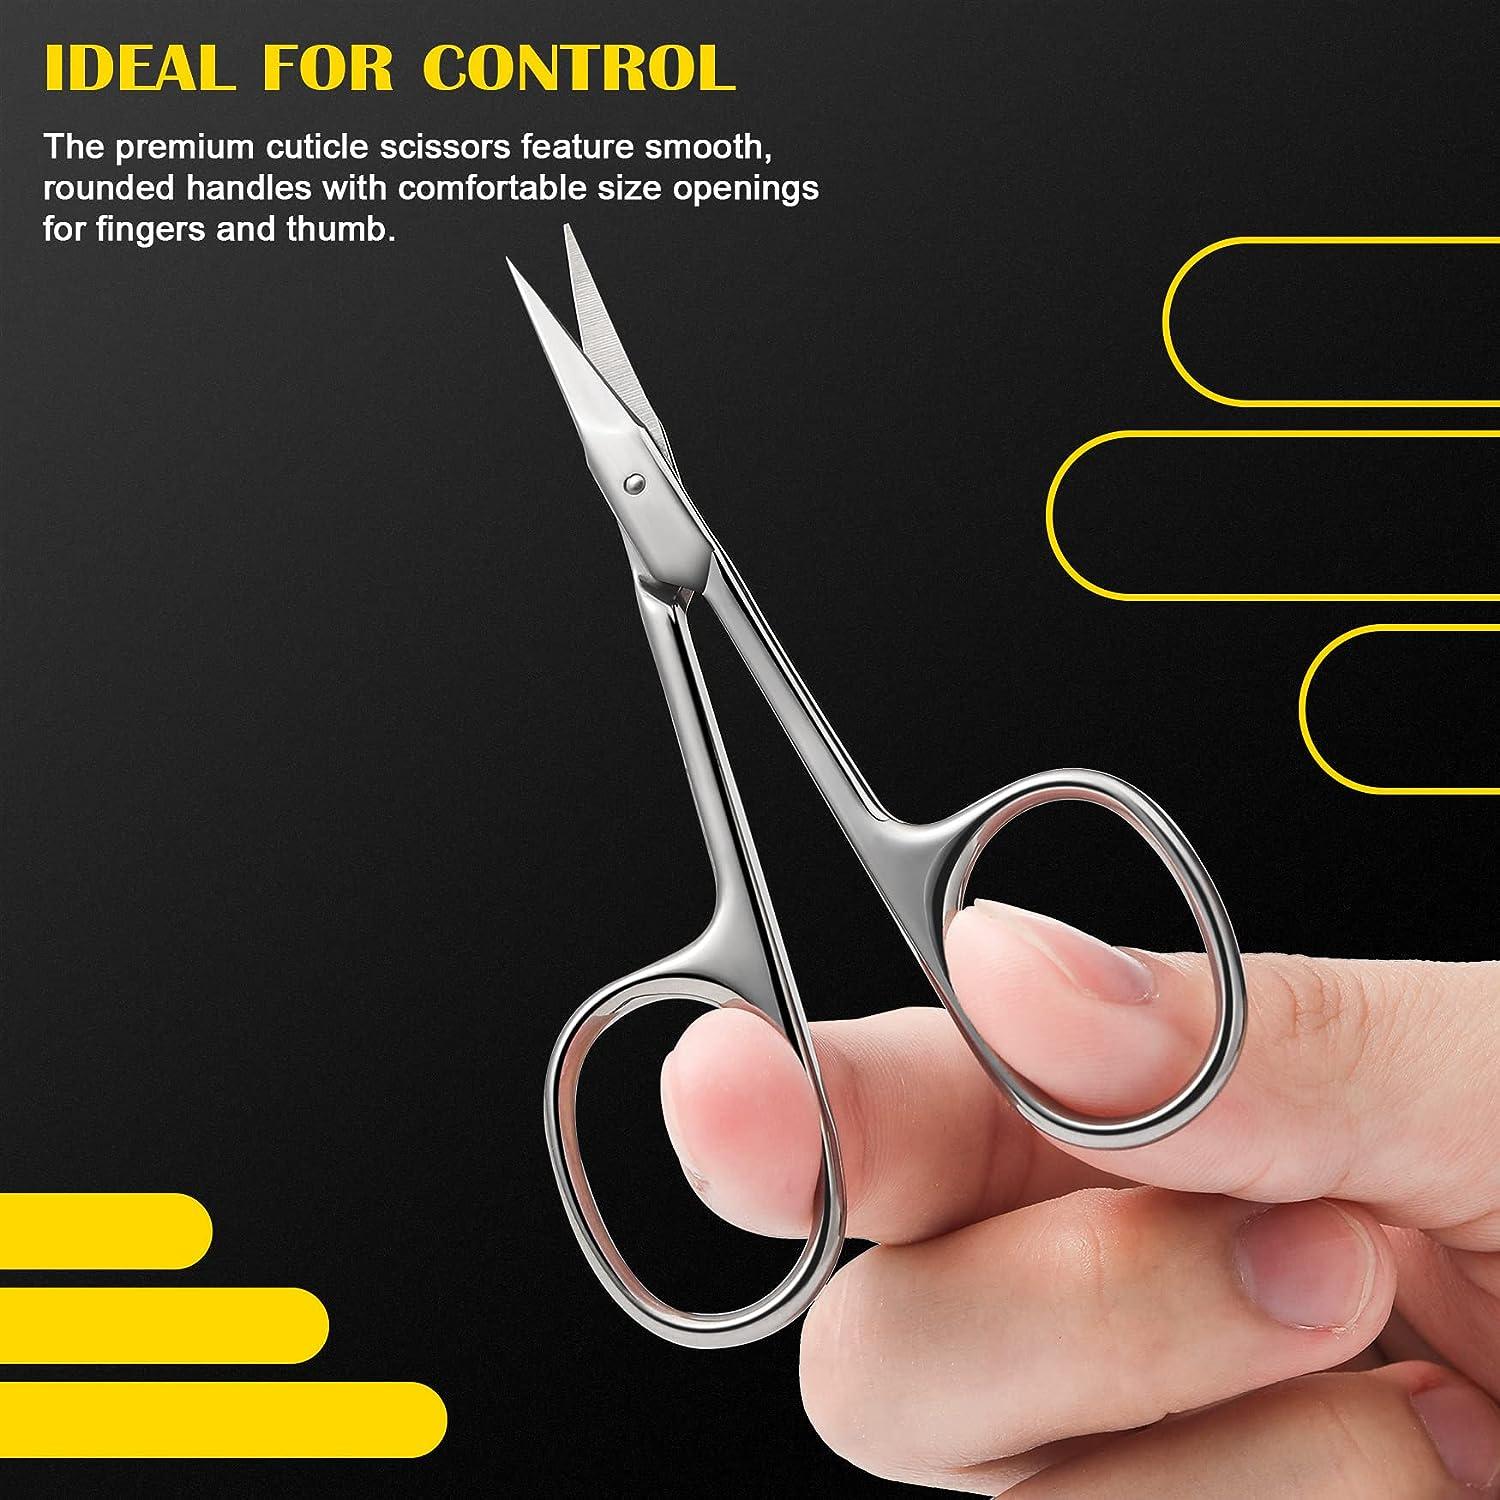 FVION Curved Cuticle Scissors Extra Fine for Women, Men and Professionals -  Stainless Steel Small Manicure Scissors with Precise Pointed Tip Grooming